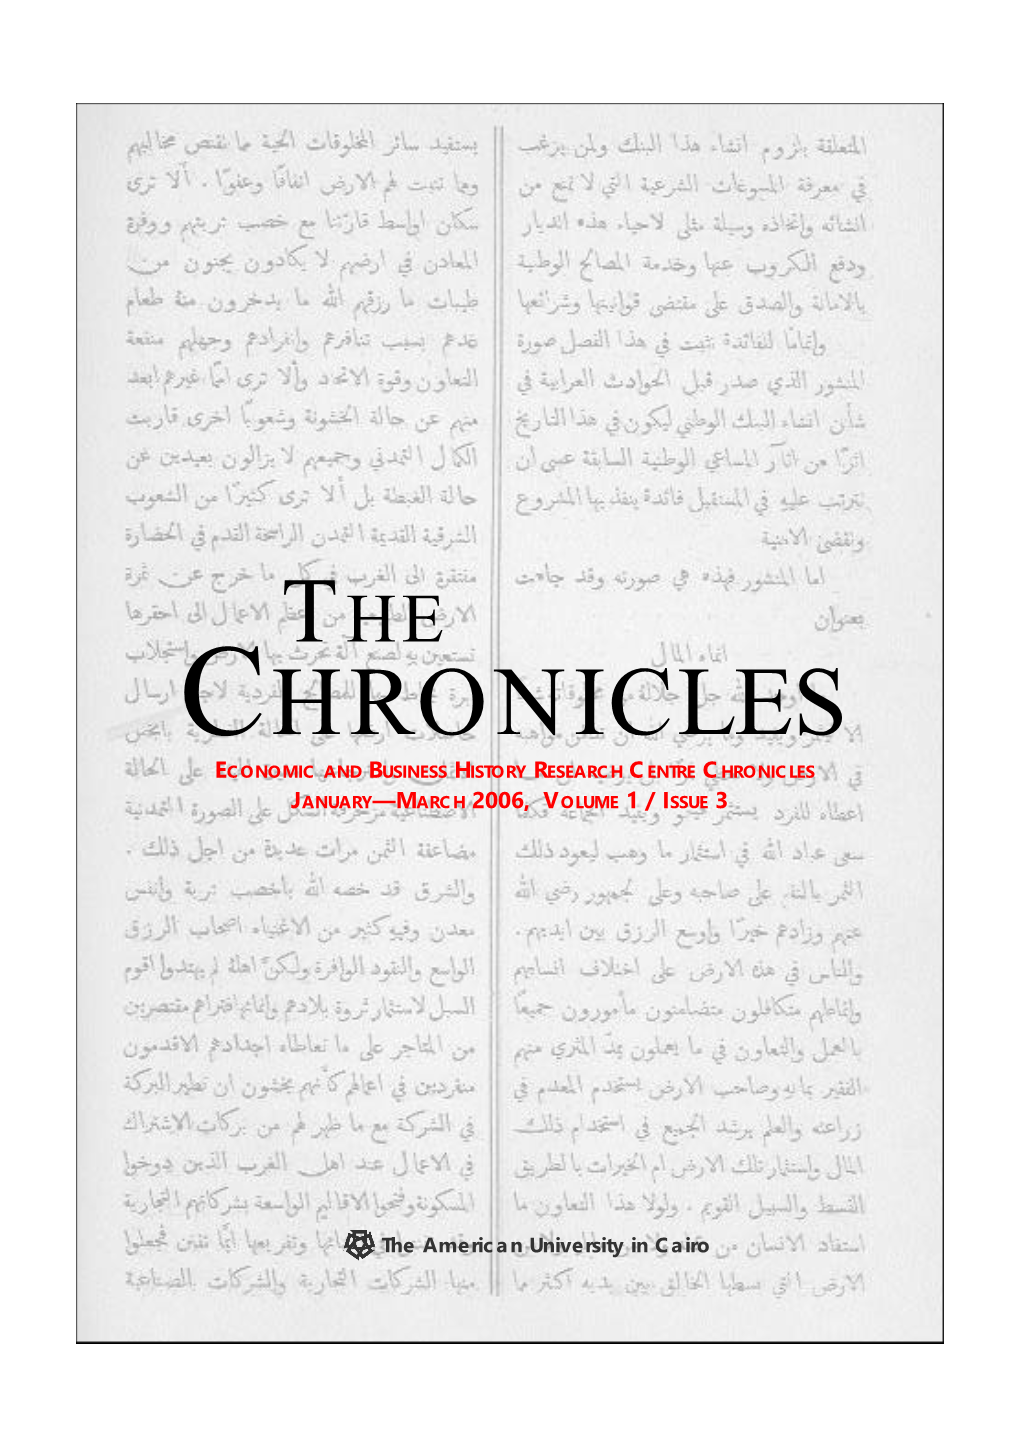 Chronicles Economic and Business History Research Centre Chronicles January—March 2006, Volume 1 / Issue 3